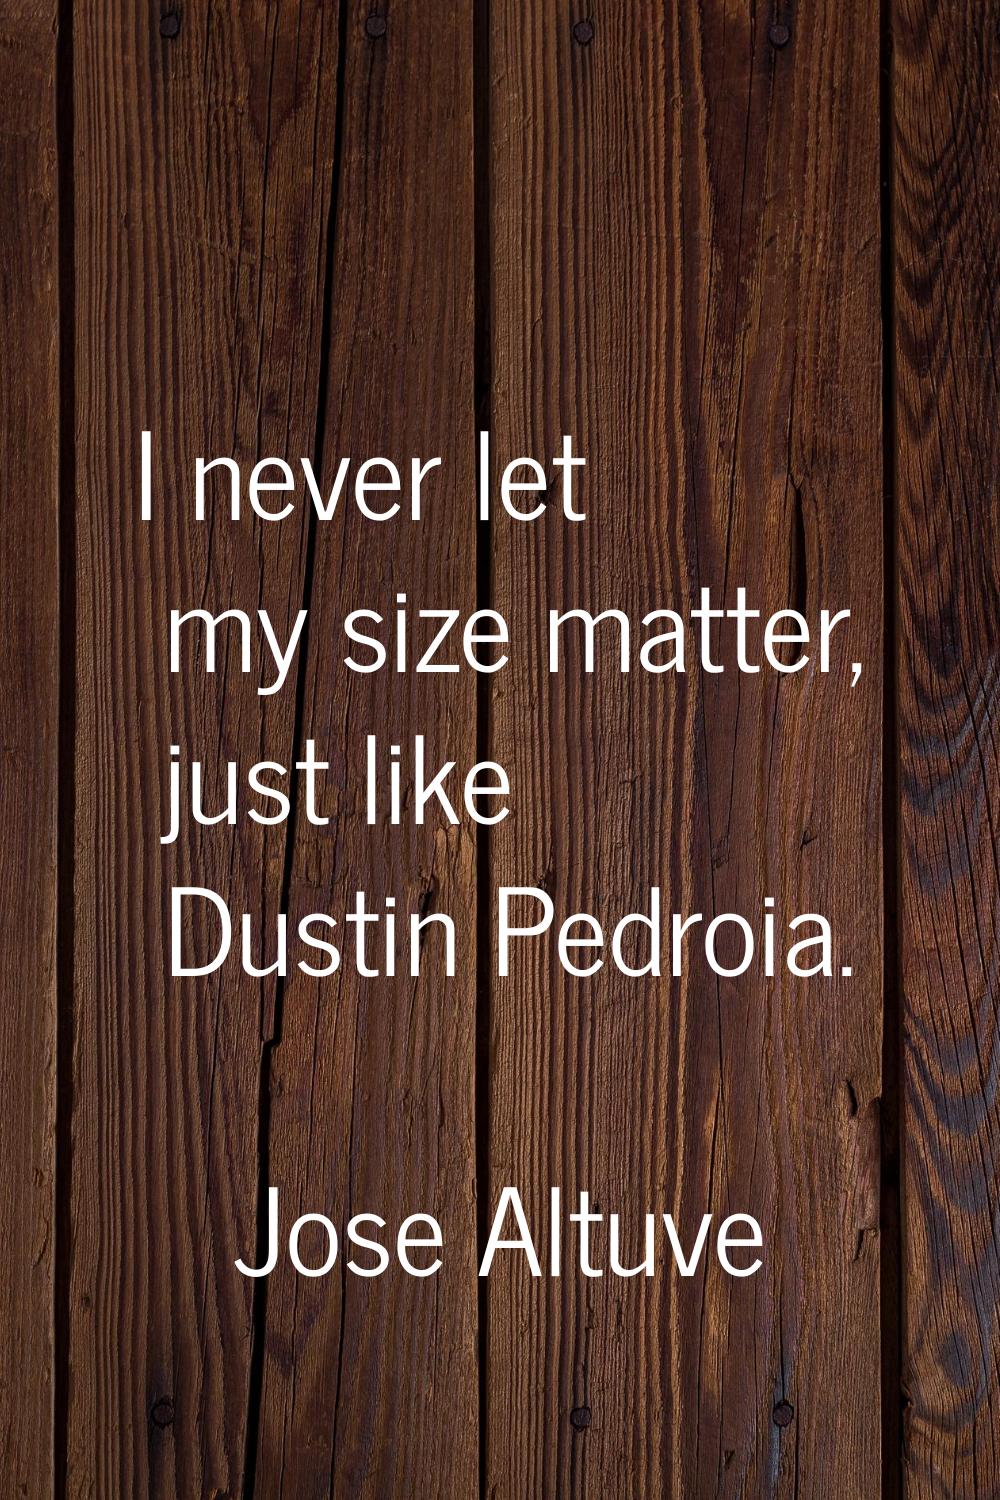 I never let my size matter, just like Dustin Pedroia.